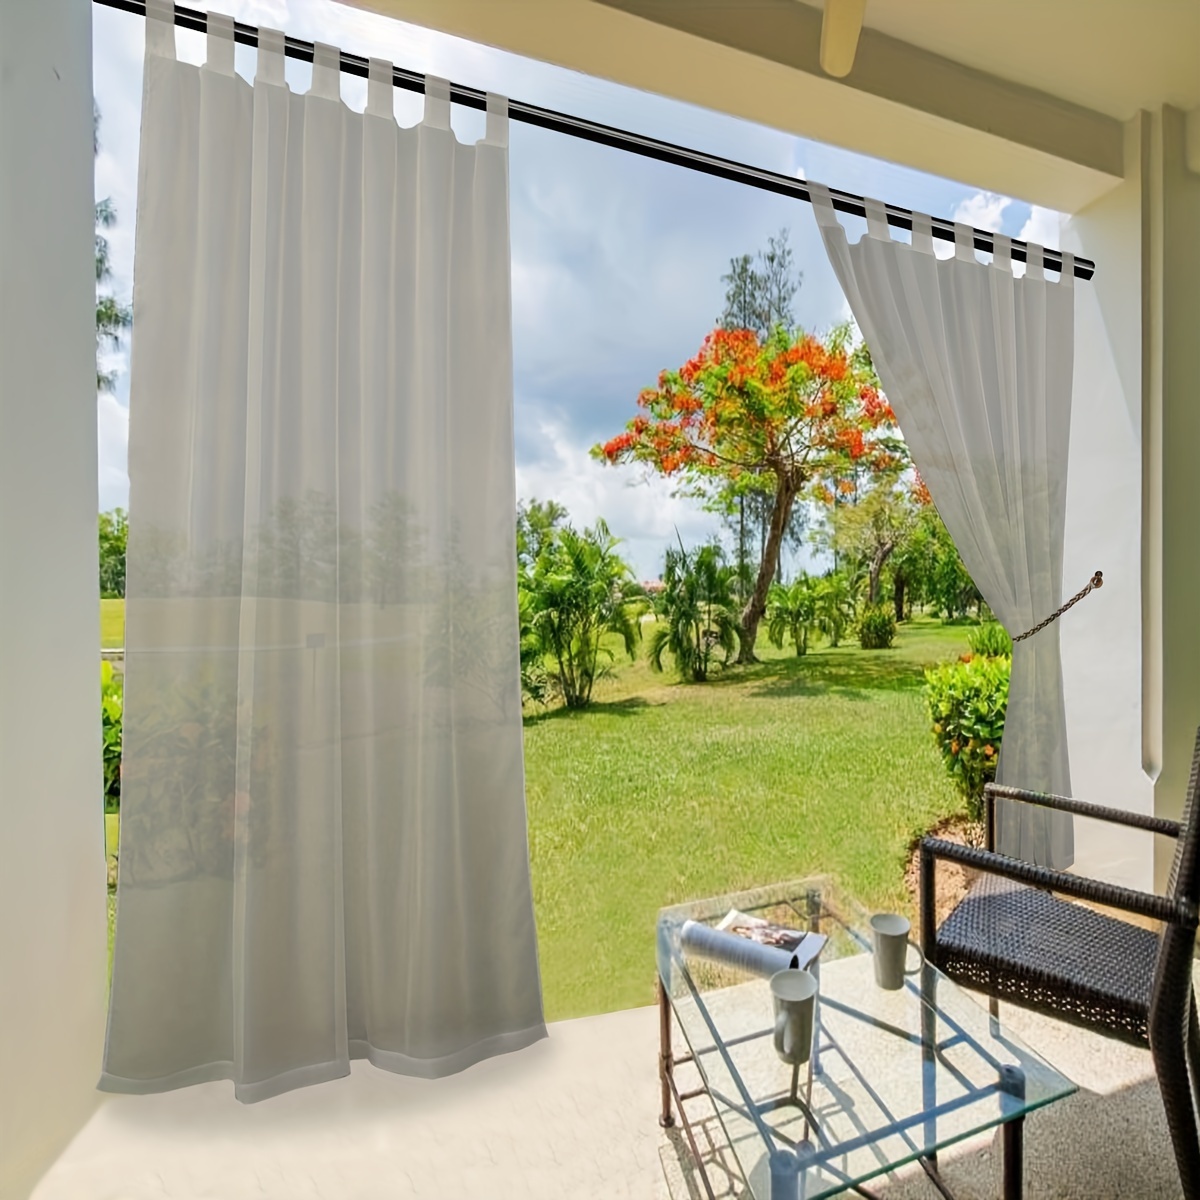 

1pc Outdoor Volie Curtain, Waterproof Light Weight Curtain With Tab Top, For Porch Pergola Patio Decoration